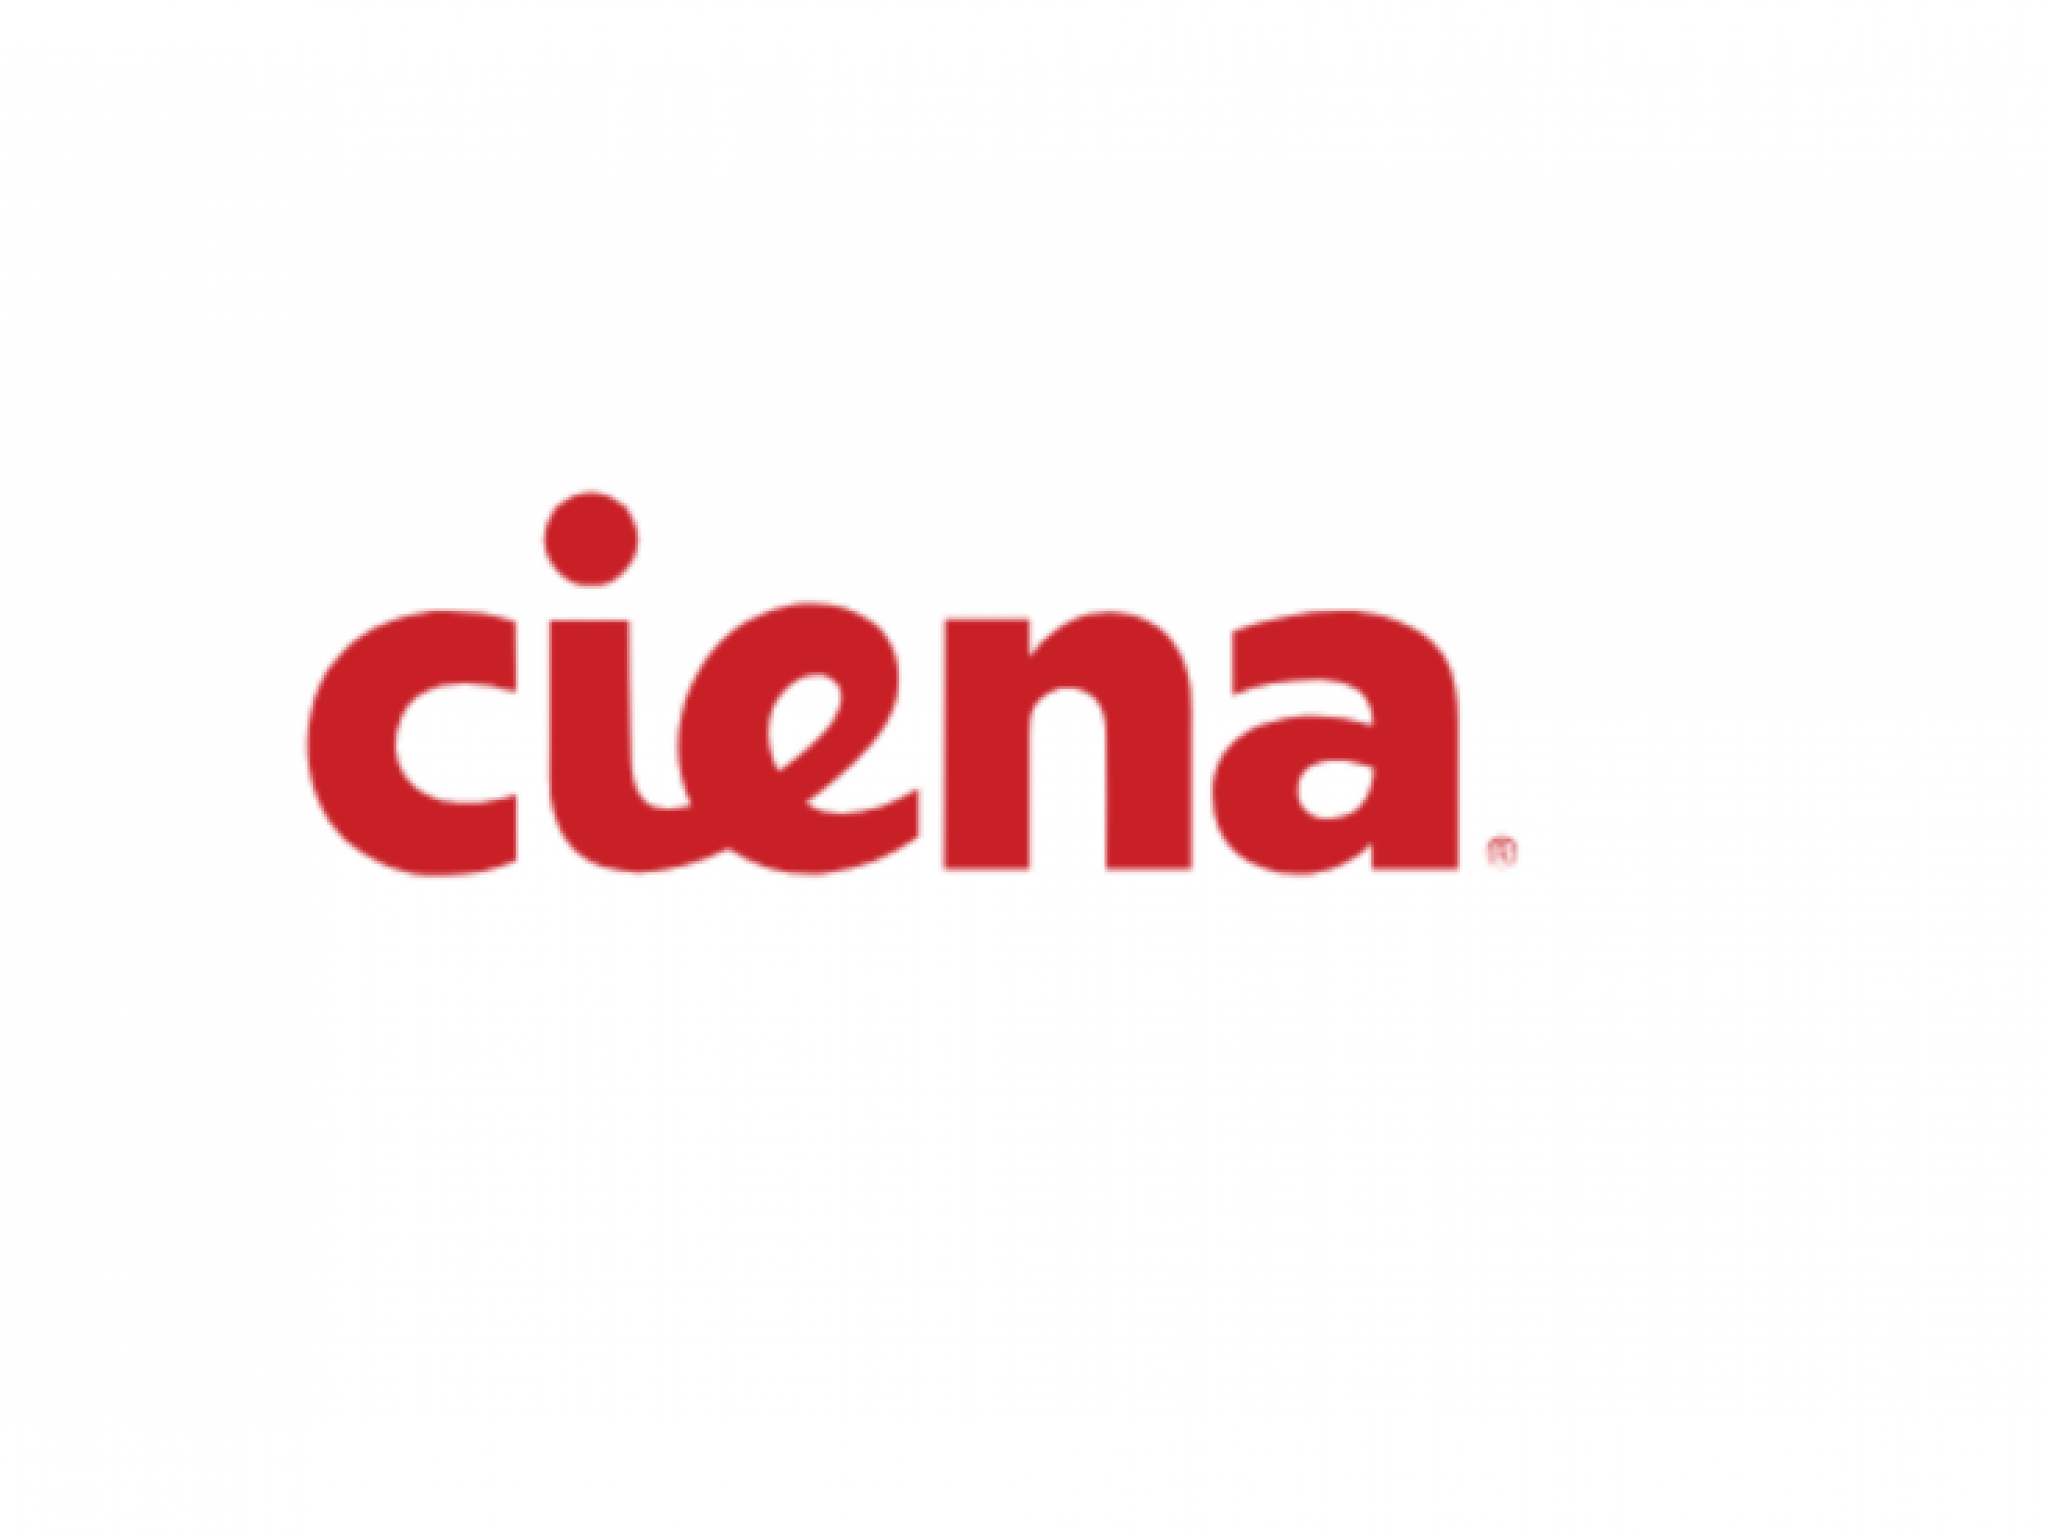  why-is-networking-company-ciena-stock-plunging-thursday 